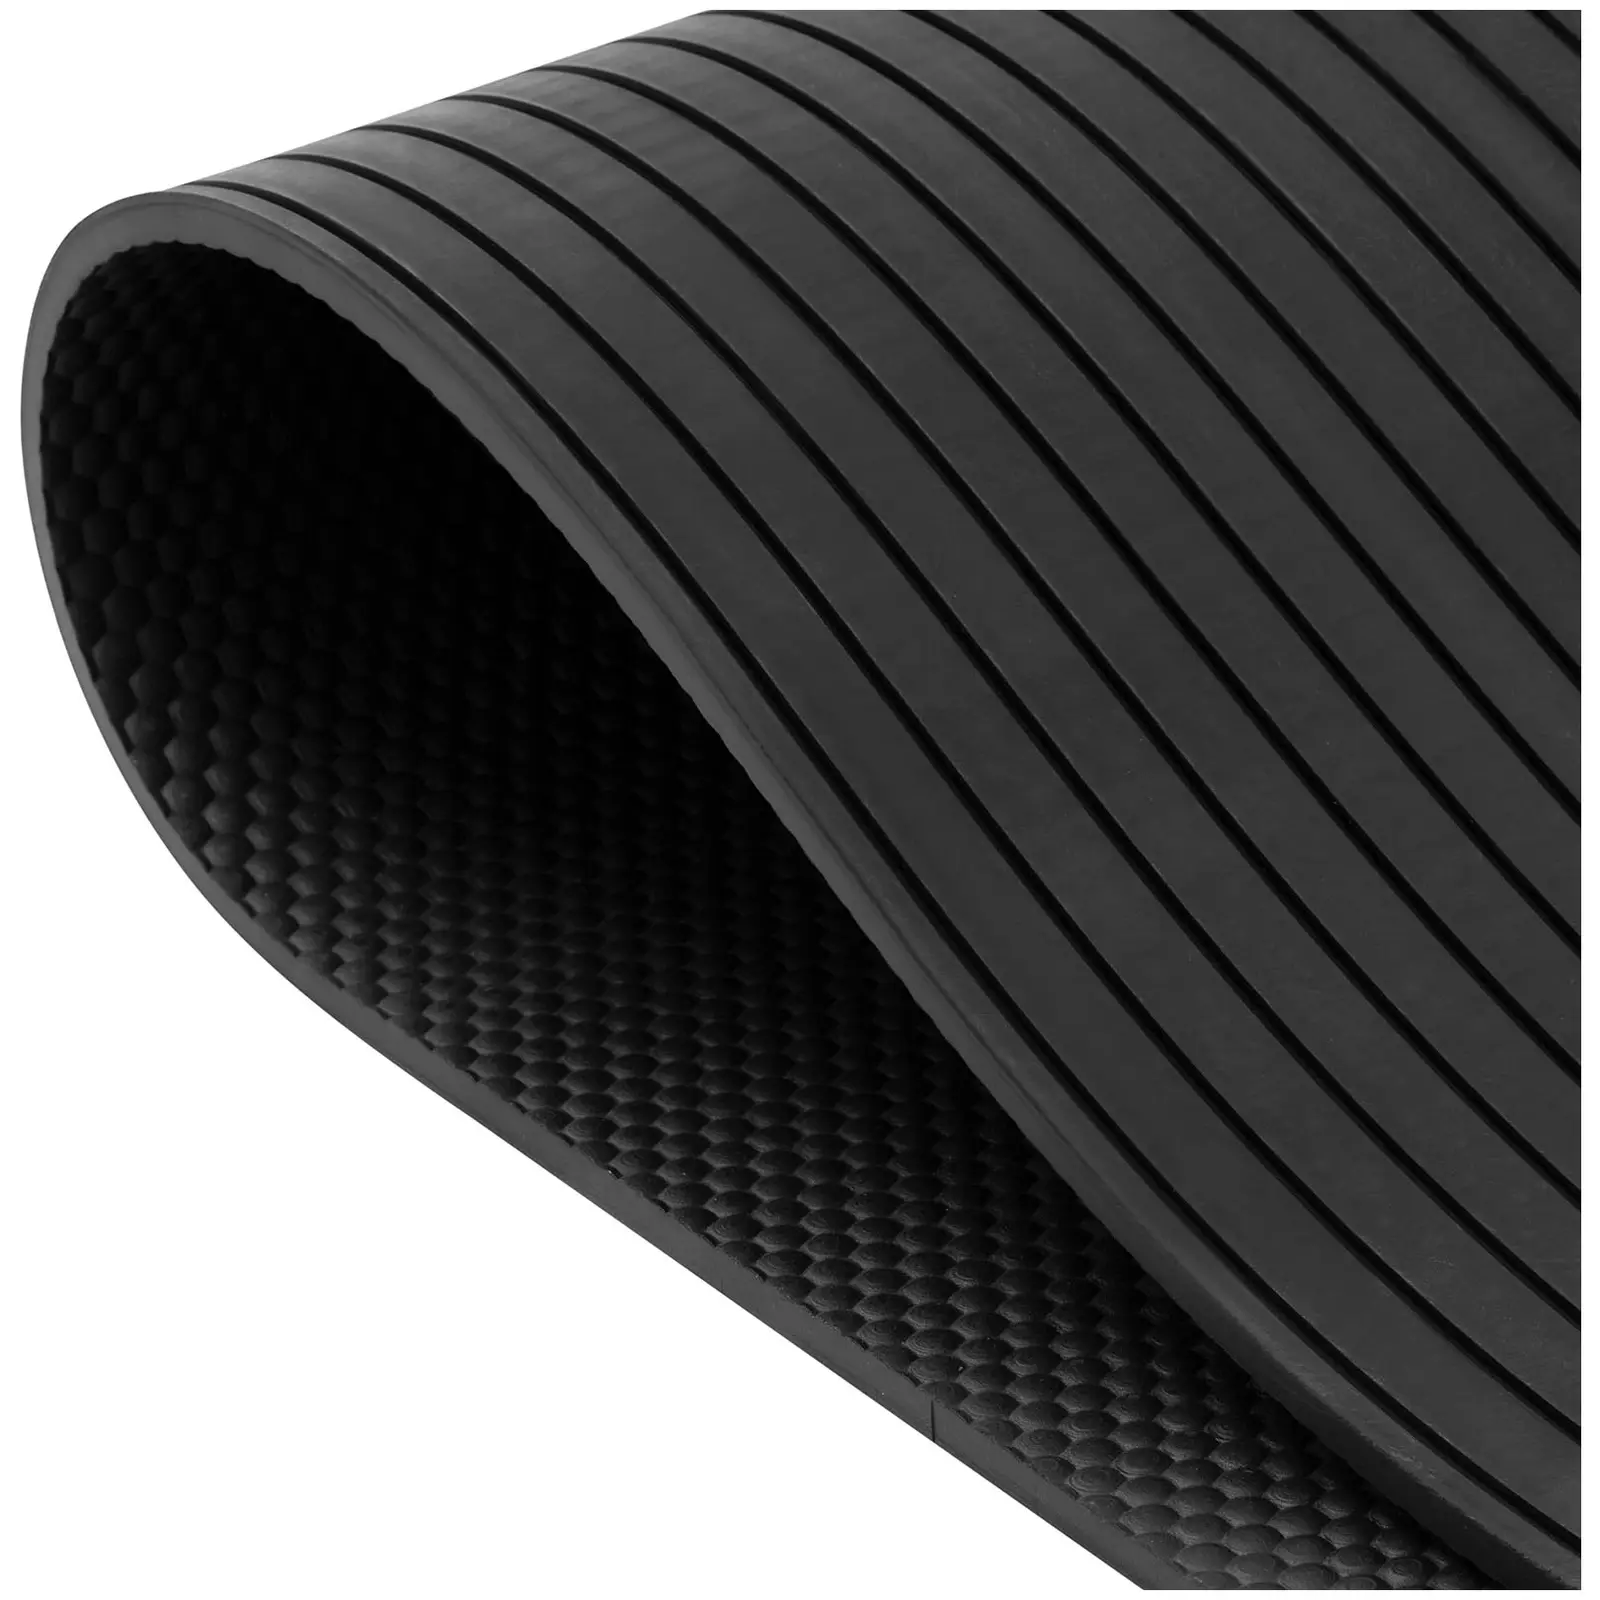 Stable Mats - set of 15 - with drainage grooves - 1830 x 1220 mm - 33.45 m²